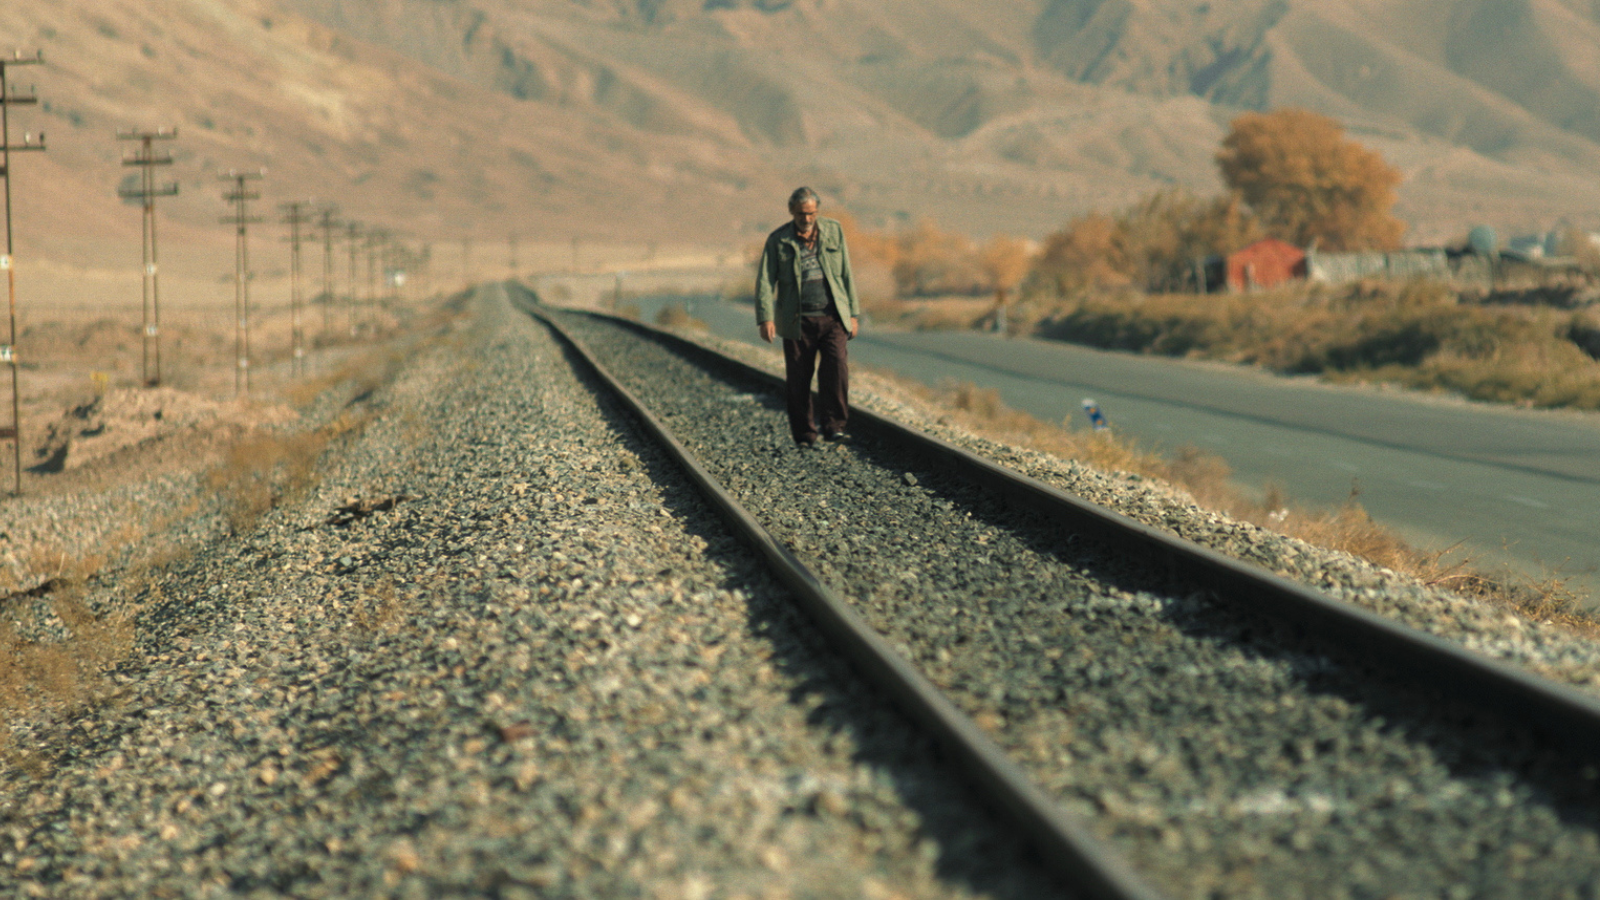 Still from Winners -Reza on Rail Tracks, courtesy of Sylph Productions 2022